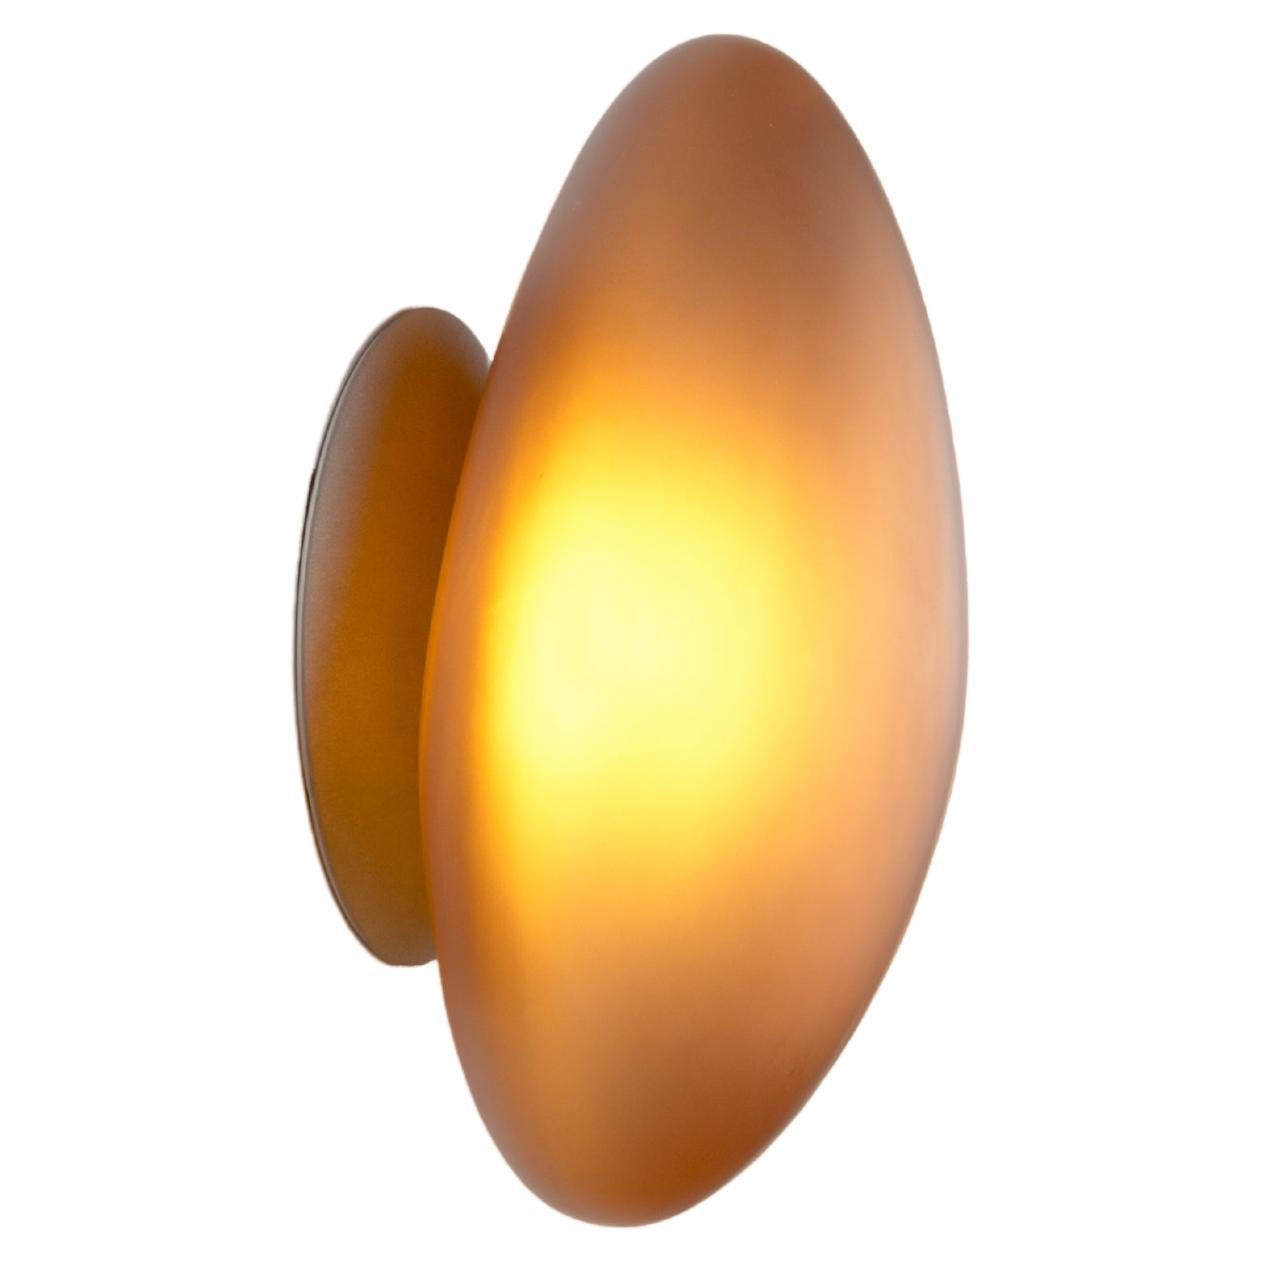 Contemporary Wall Lamp 'Pebble' by Andlight, Shape C, Citrine For Sale